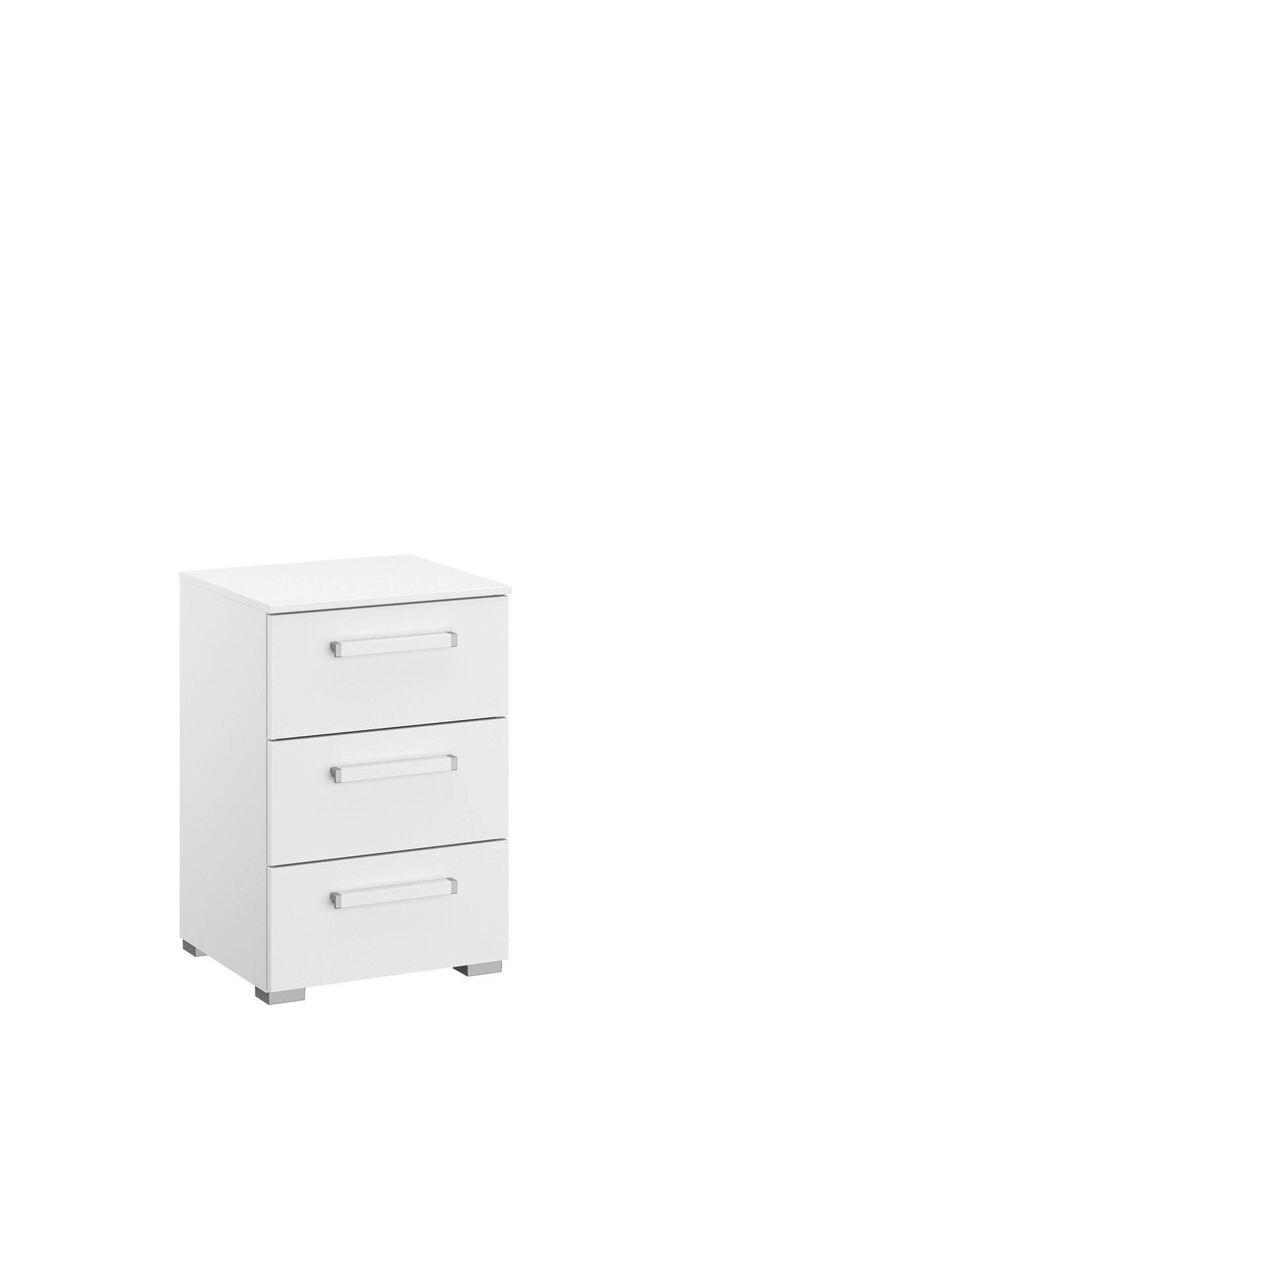 Lazio 3 Drawer Bedside Table - image 1